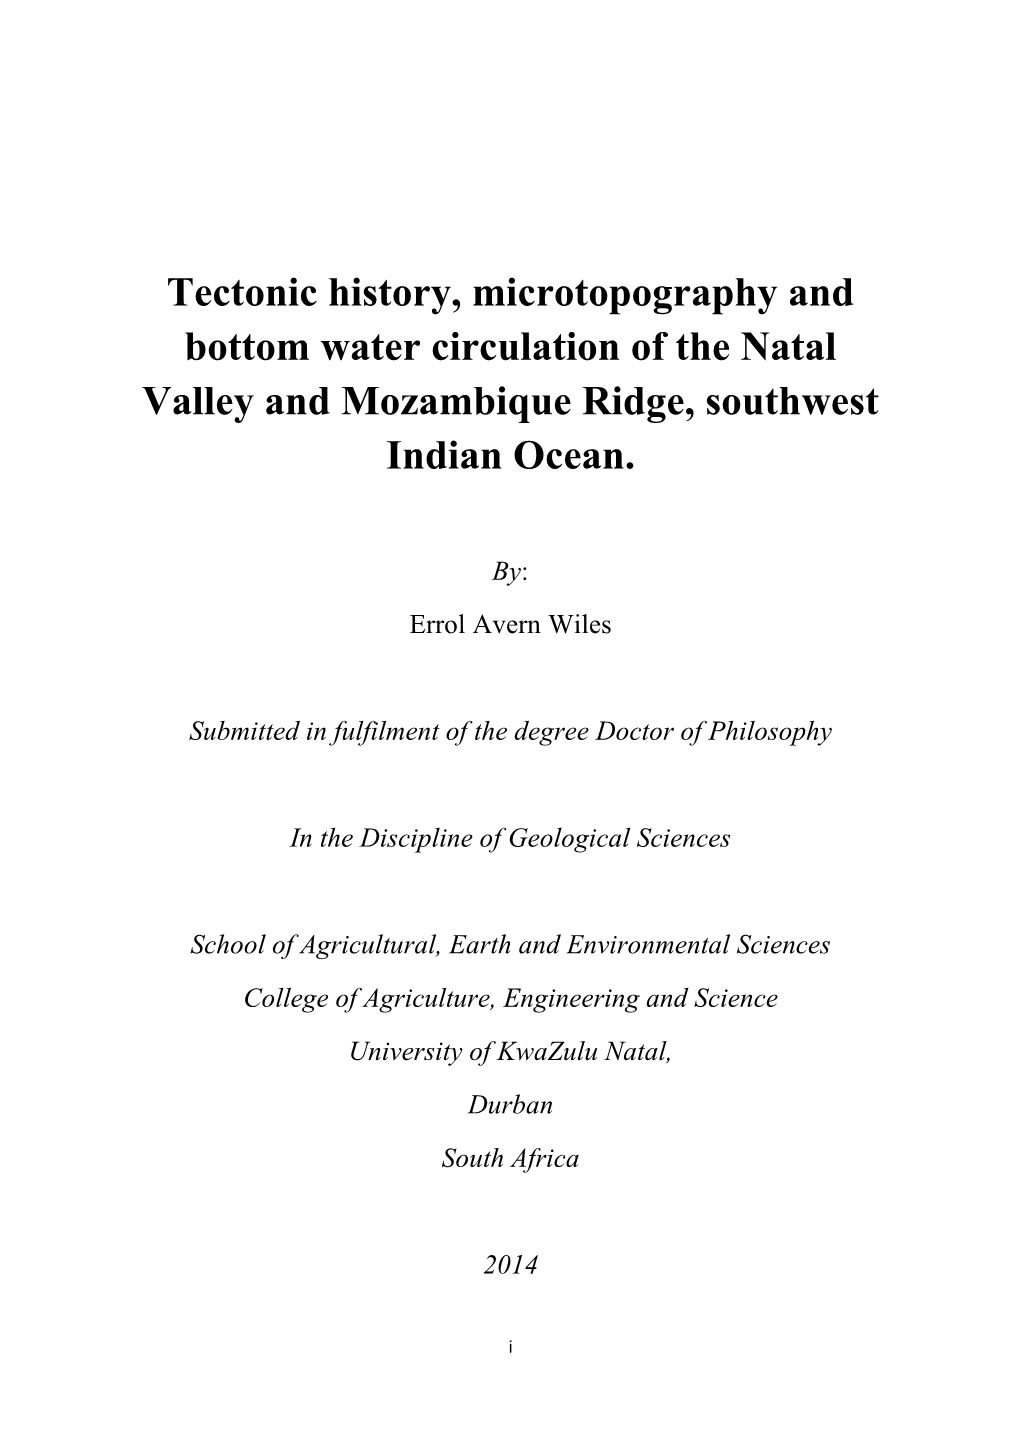 Tectonic History, Microtopography and Bottom Water Circulation of the Natal Valley and Mozambique Ridge, Southwest Indian Ocean